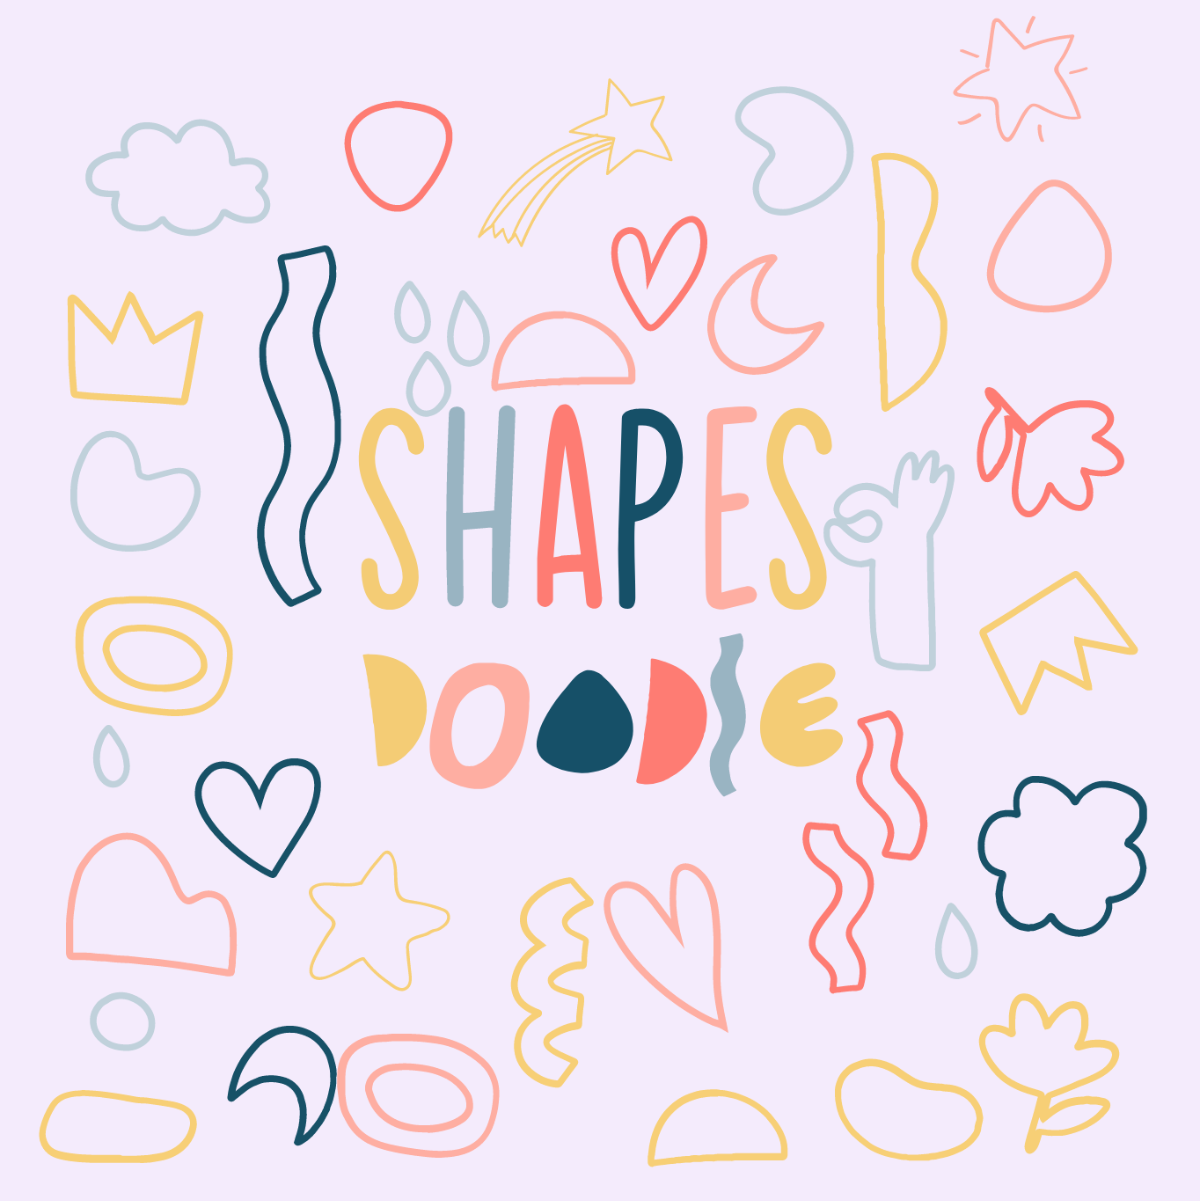 Doodle Shapes Vector Template